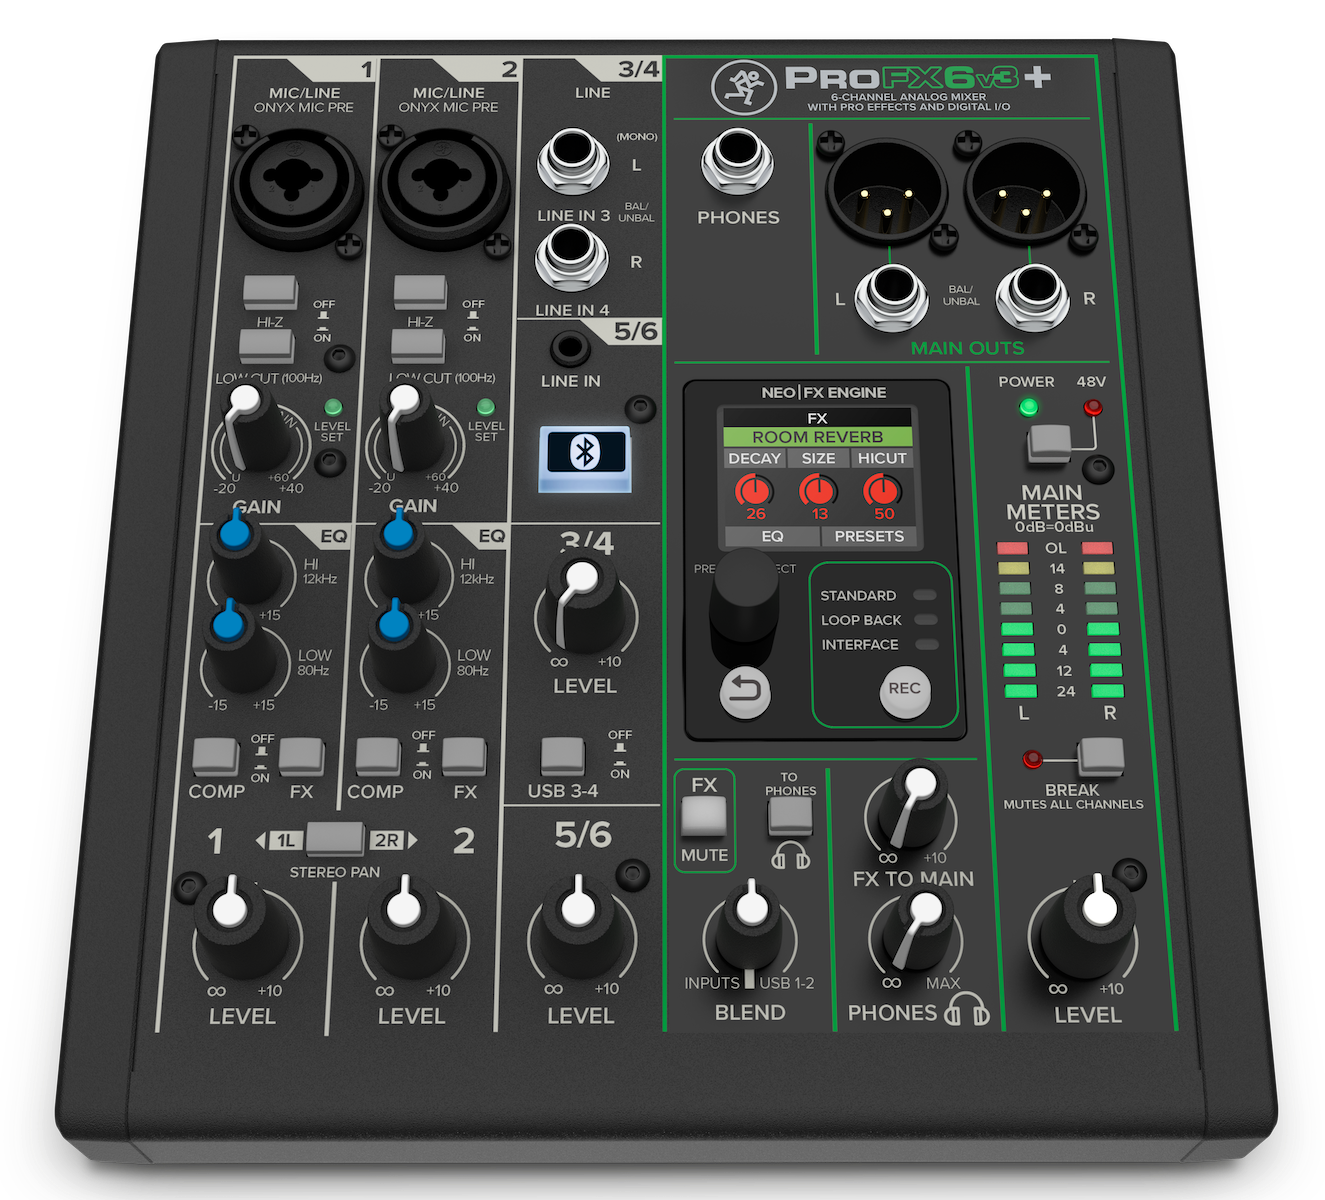 Profx6v3+ 6-channel analog mixer with enhanced FX, USB recording modes and bluetooth